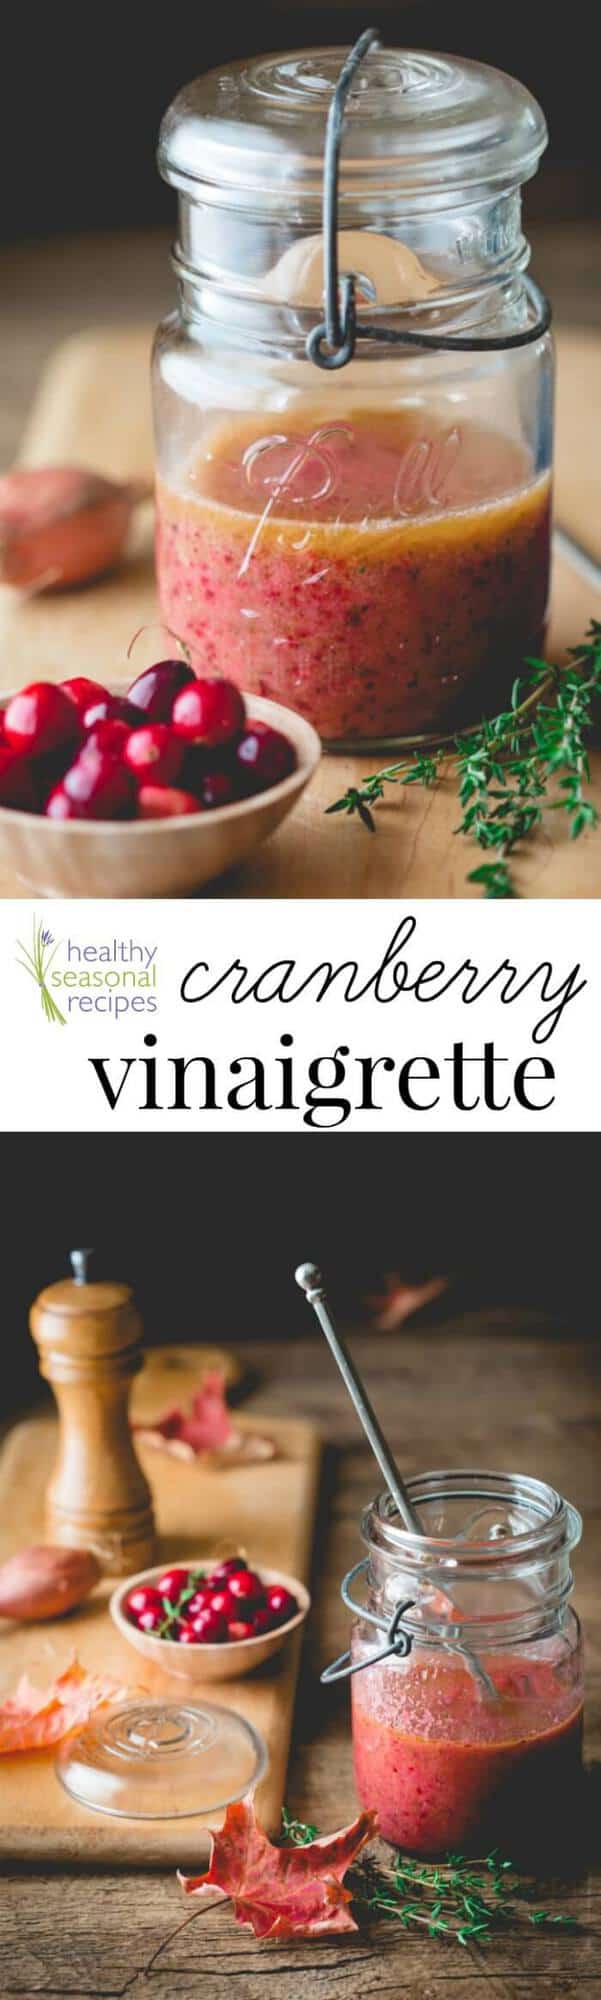 collage of cranberry vinaigrette photos with text overlay